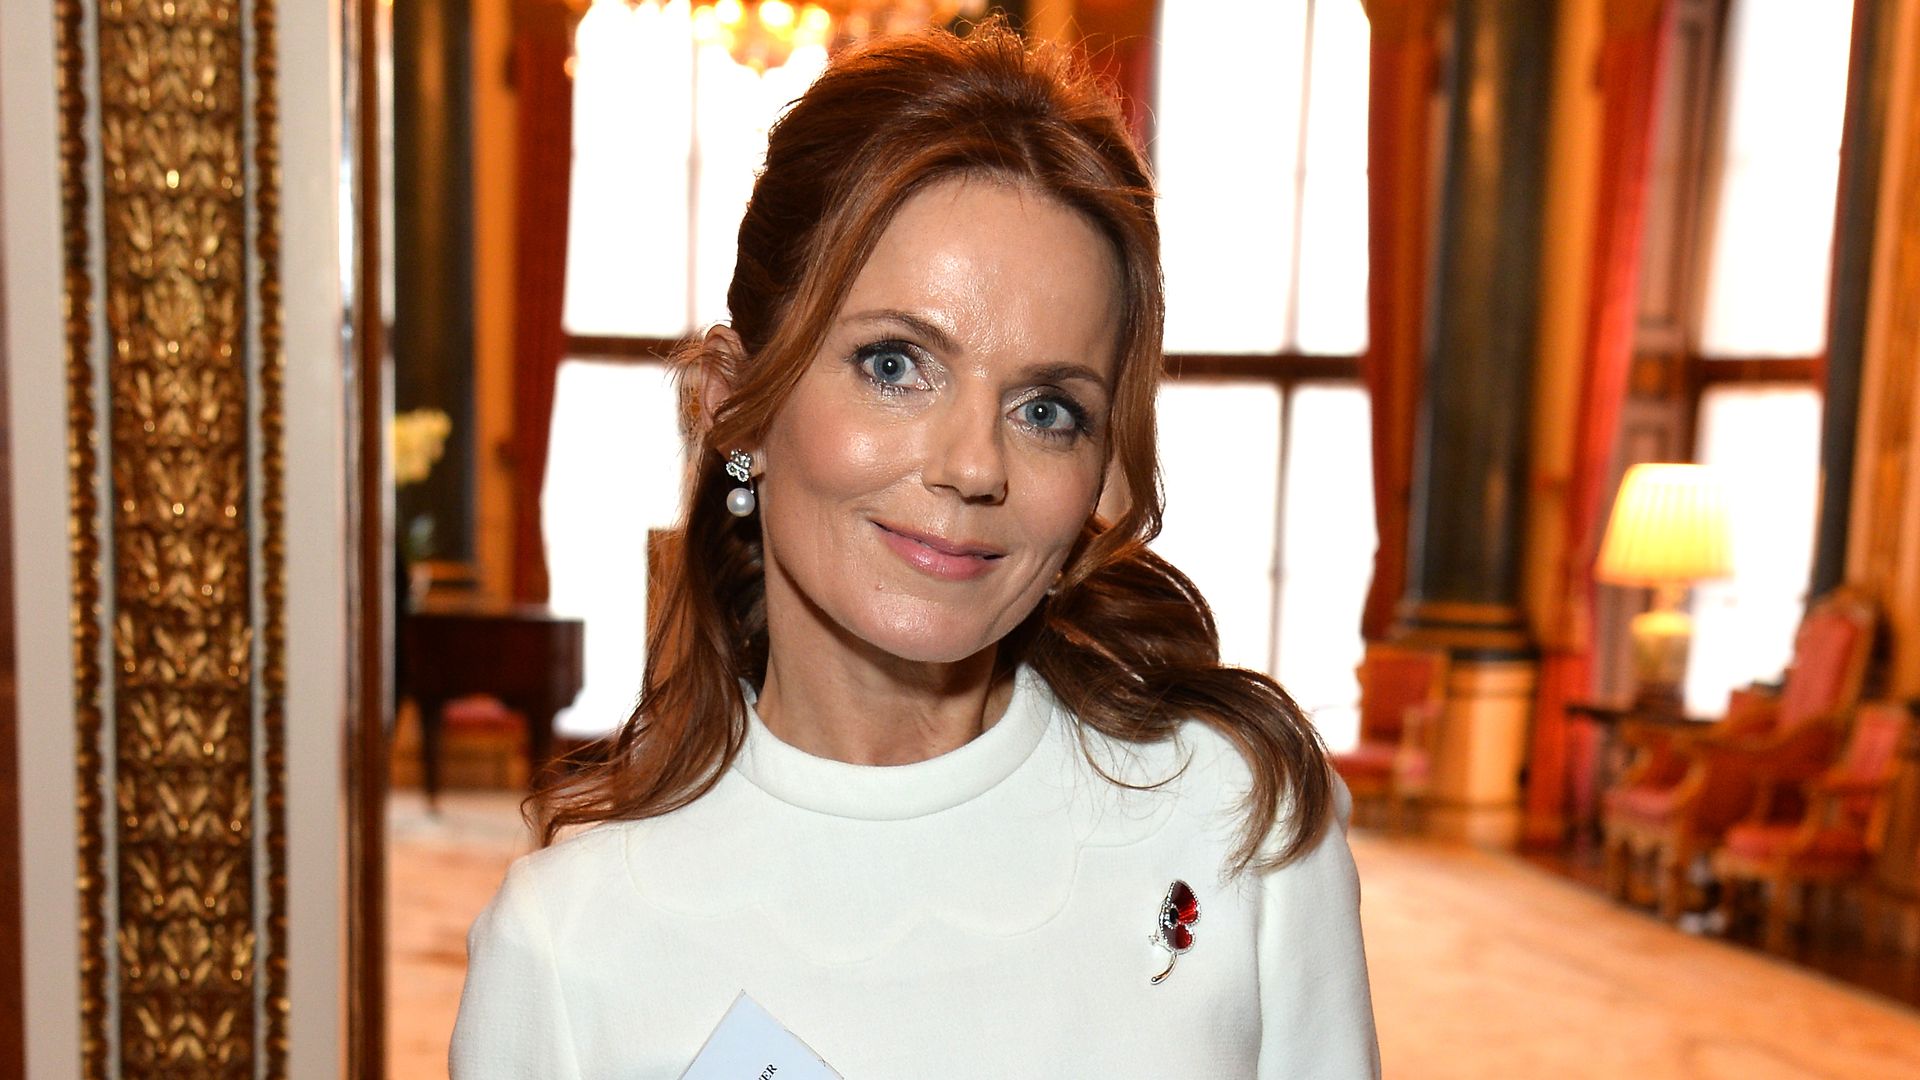 Geri Horner in a white dress with a rose lapel